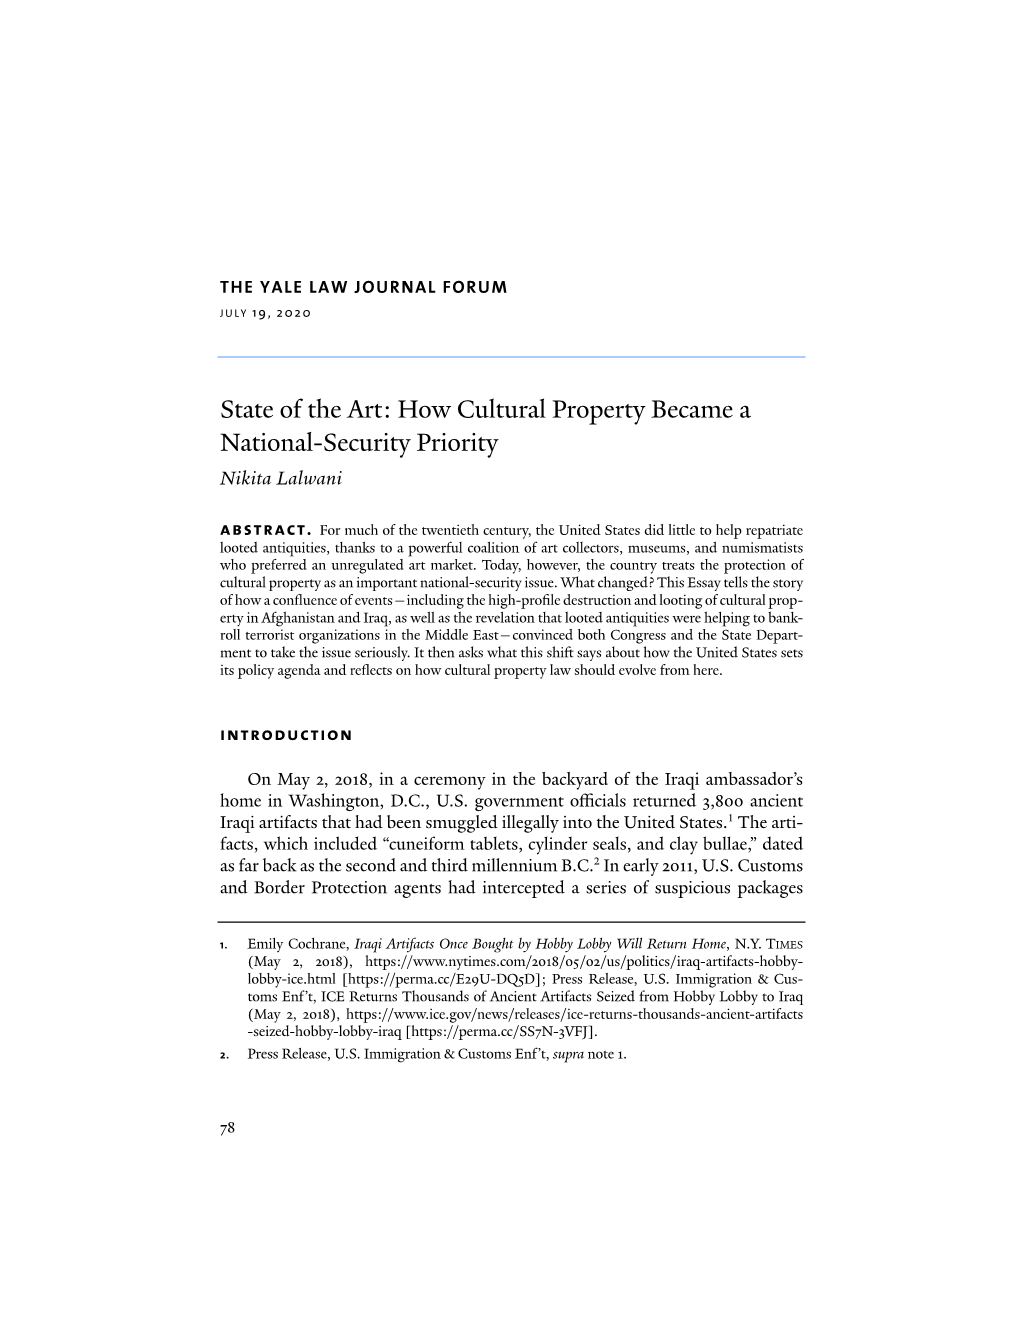 State of the Art: How Cultural Property Became a National-Security Priority Nikita Lalwani Abstract